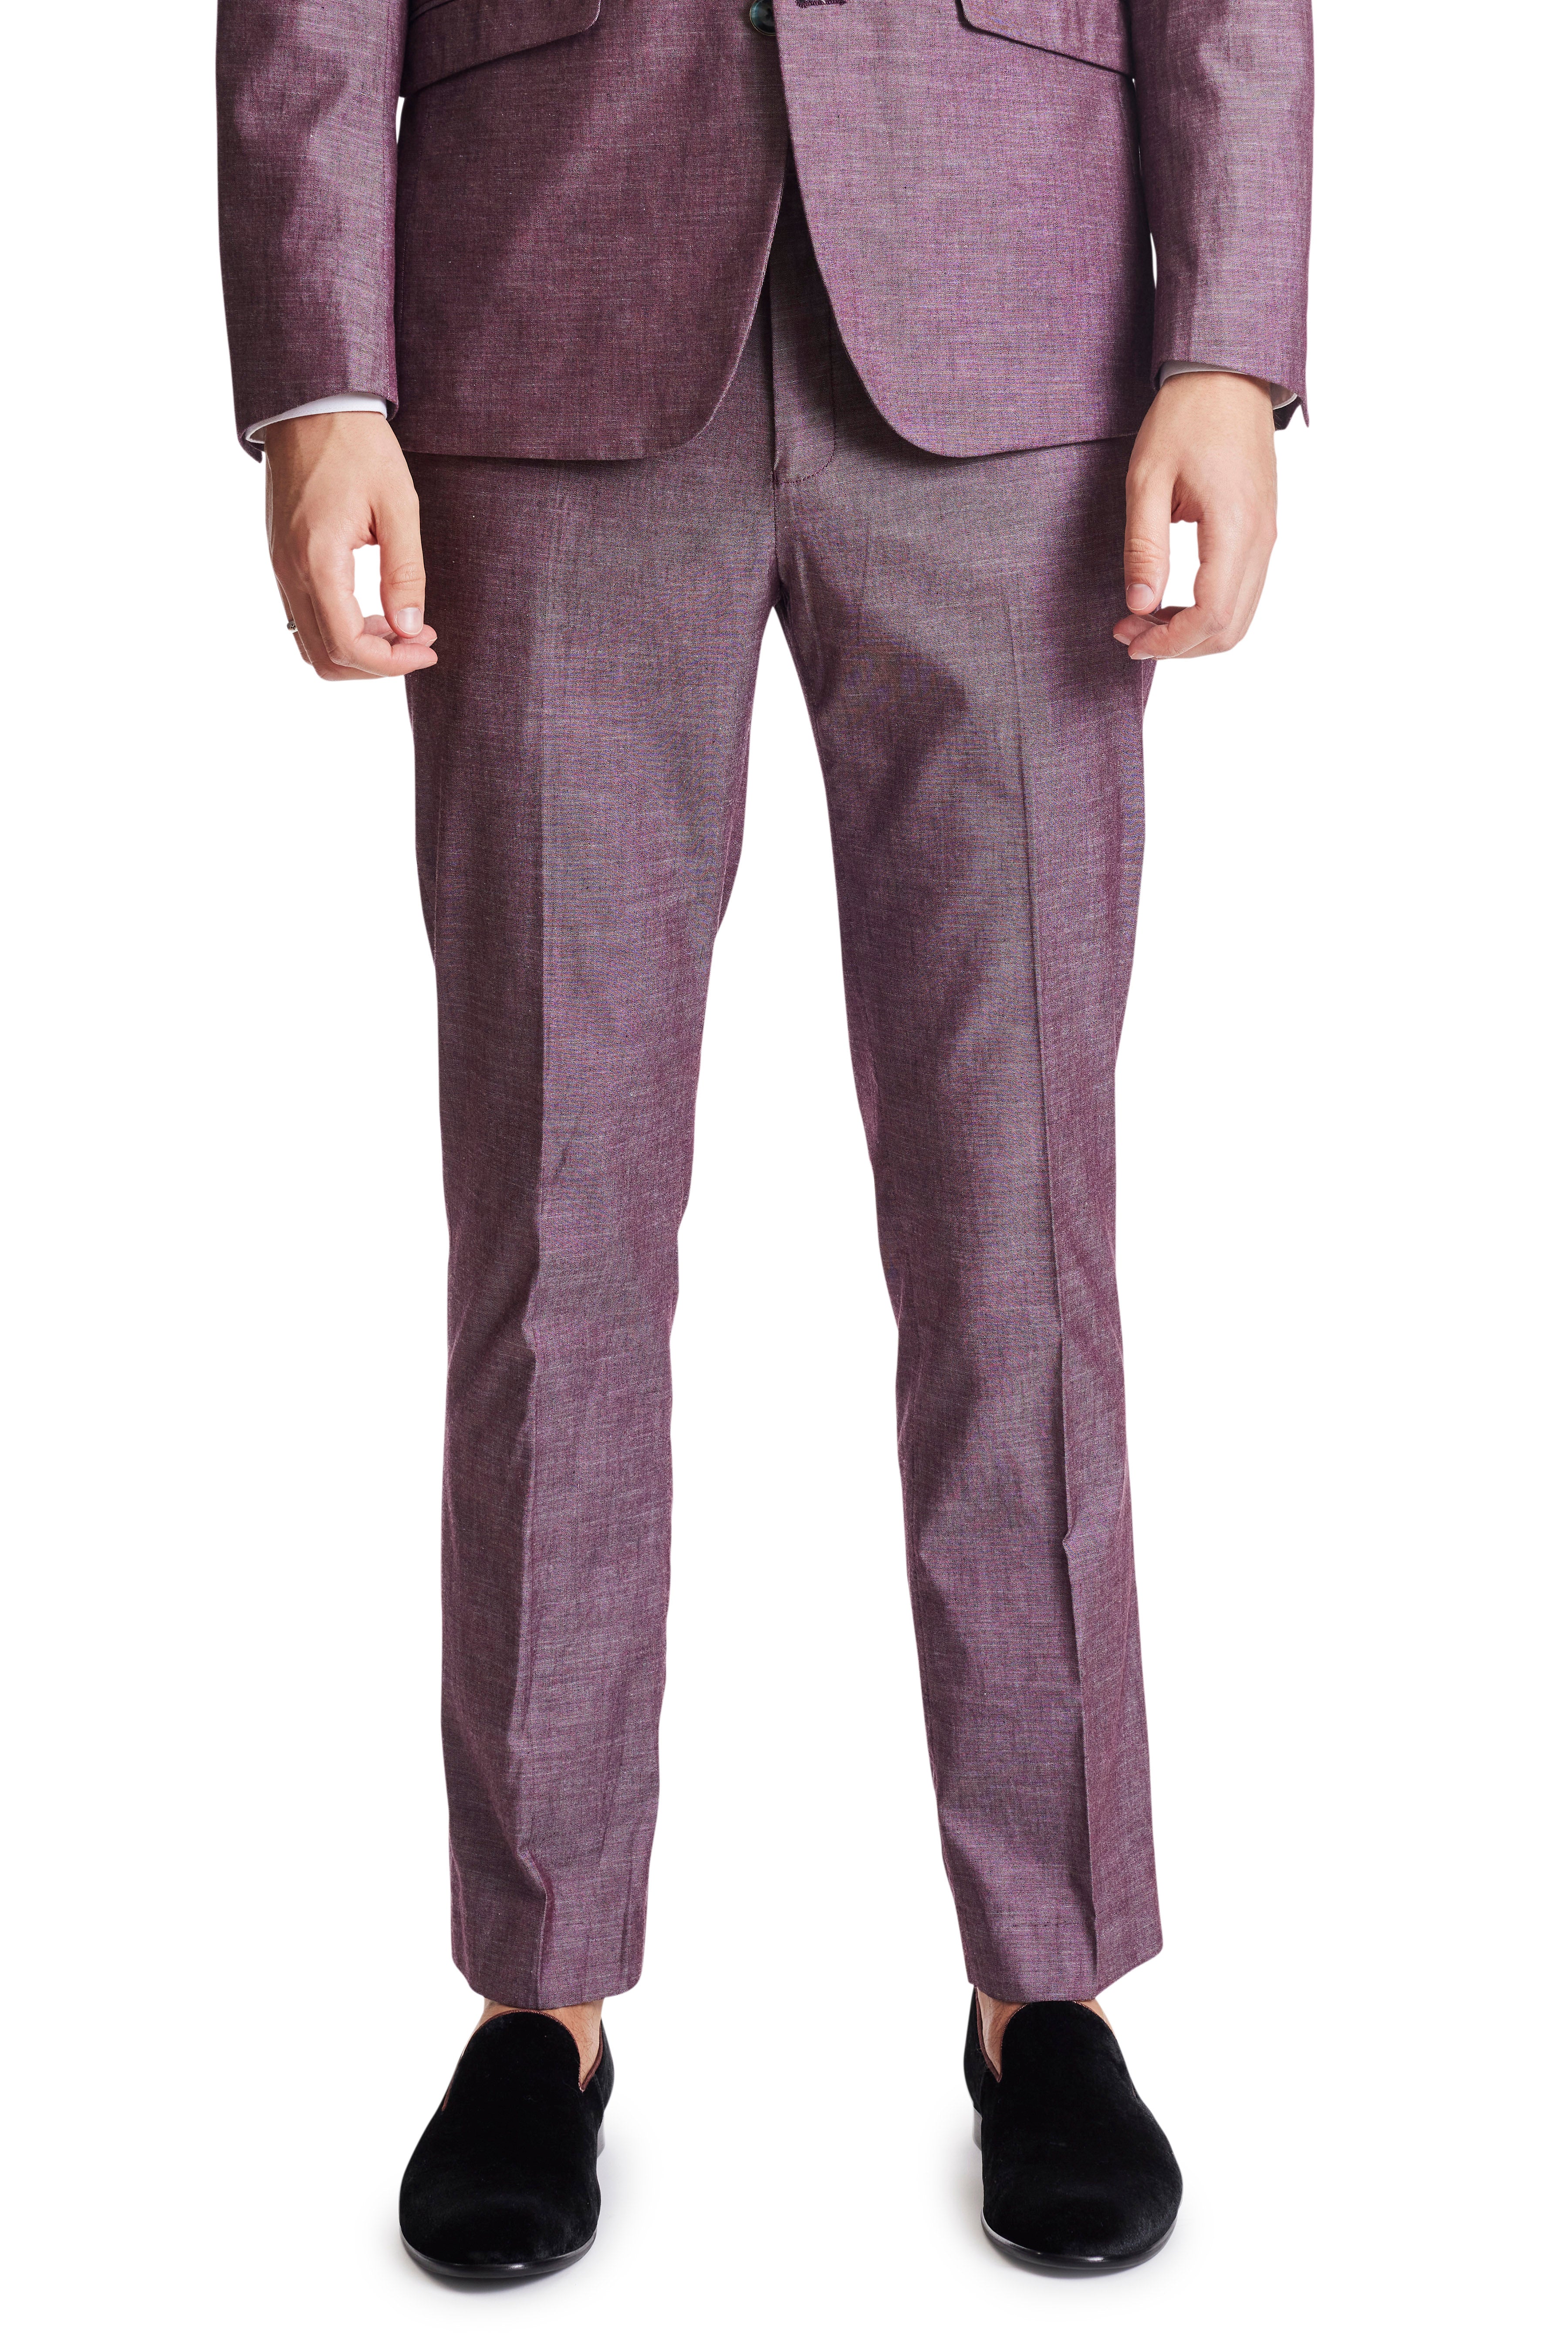 Downing Pants - slim - Mulberry